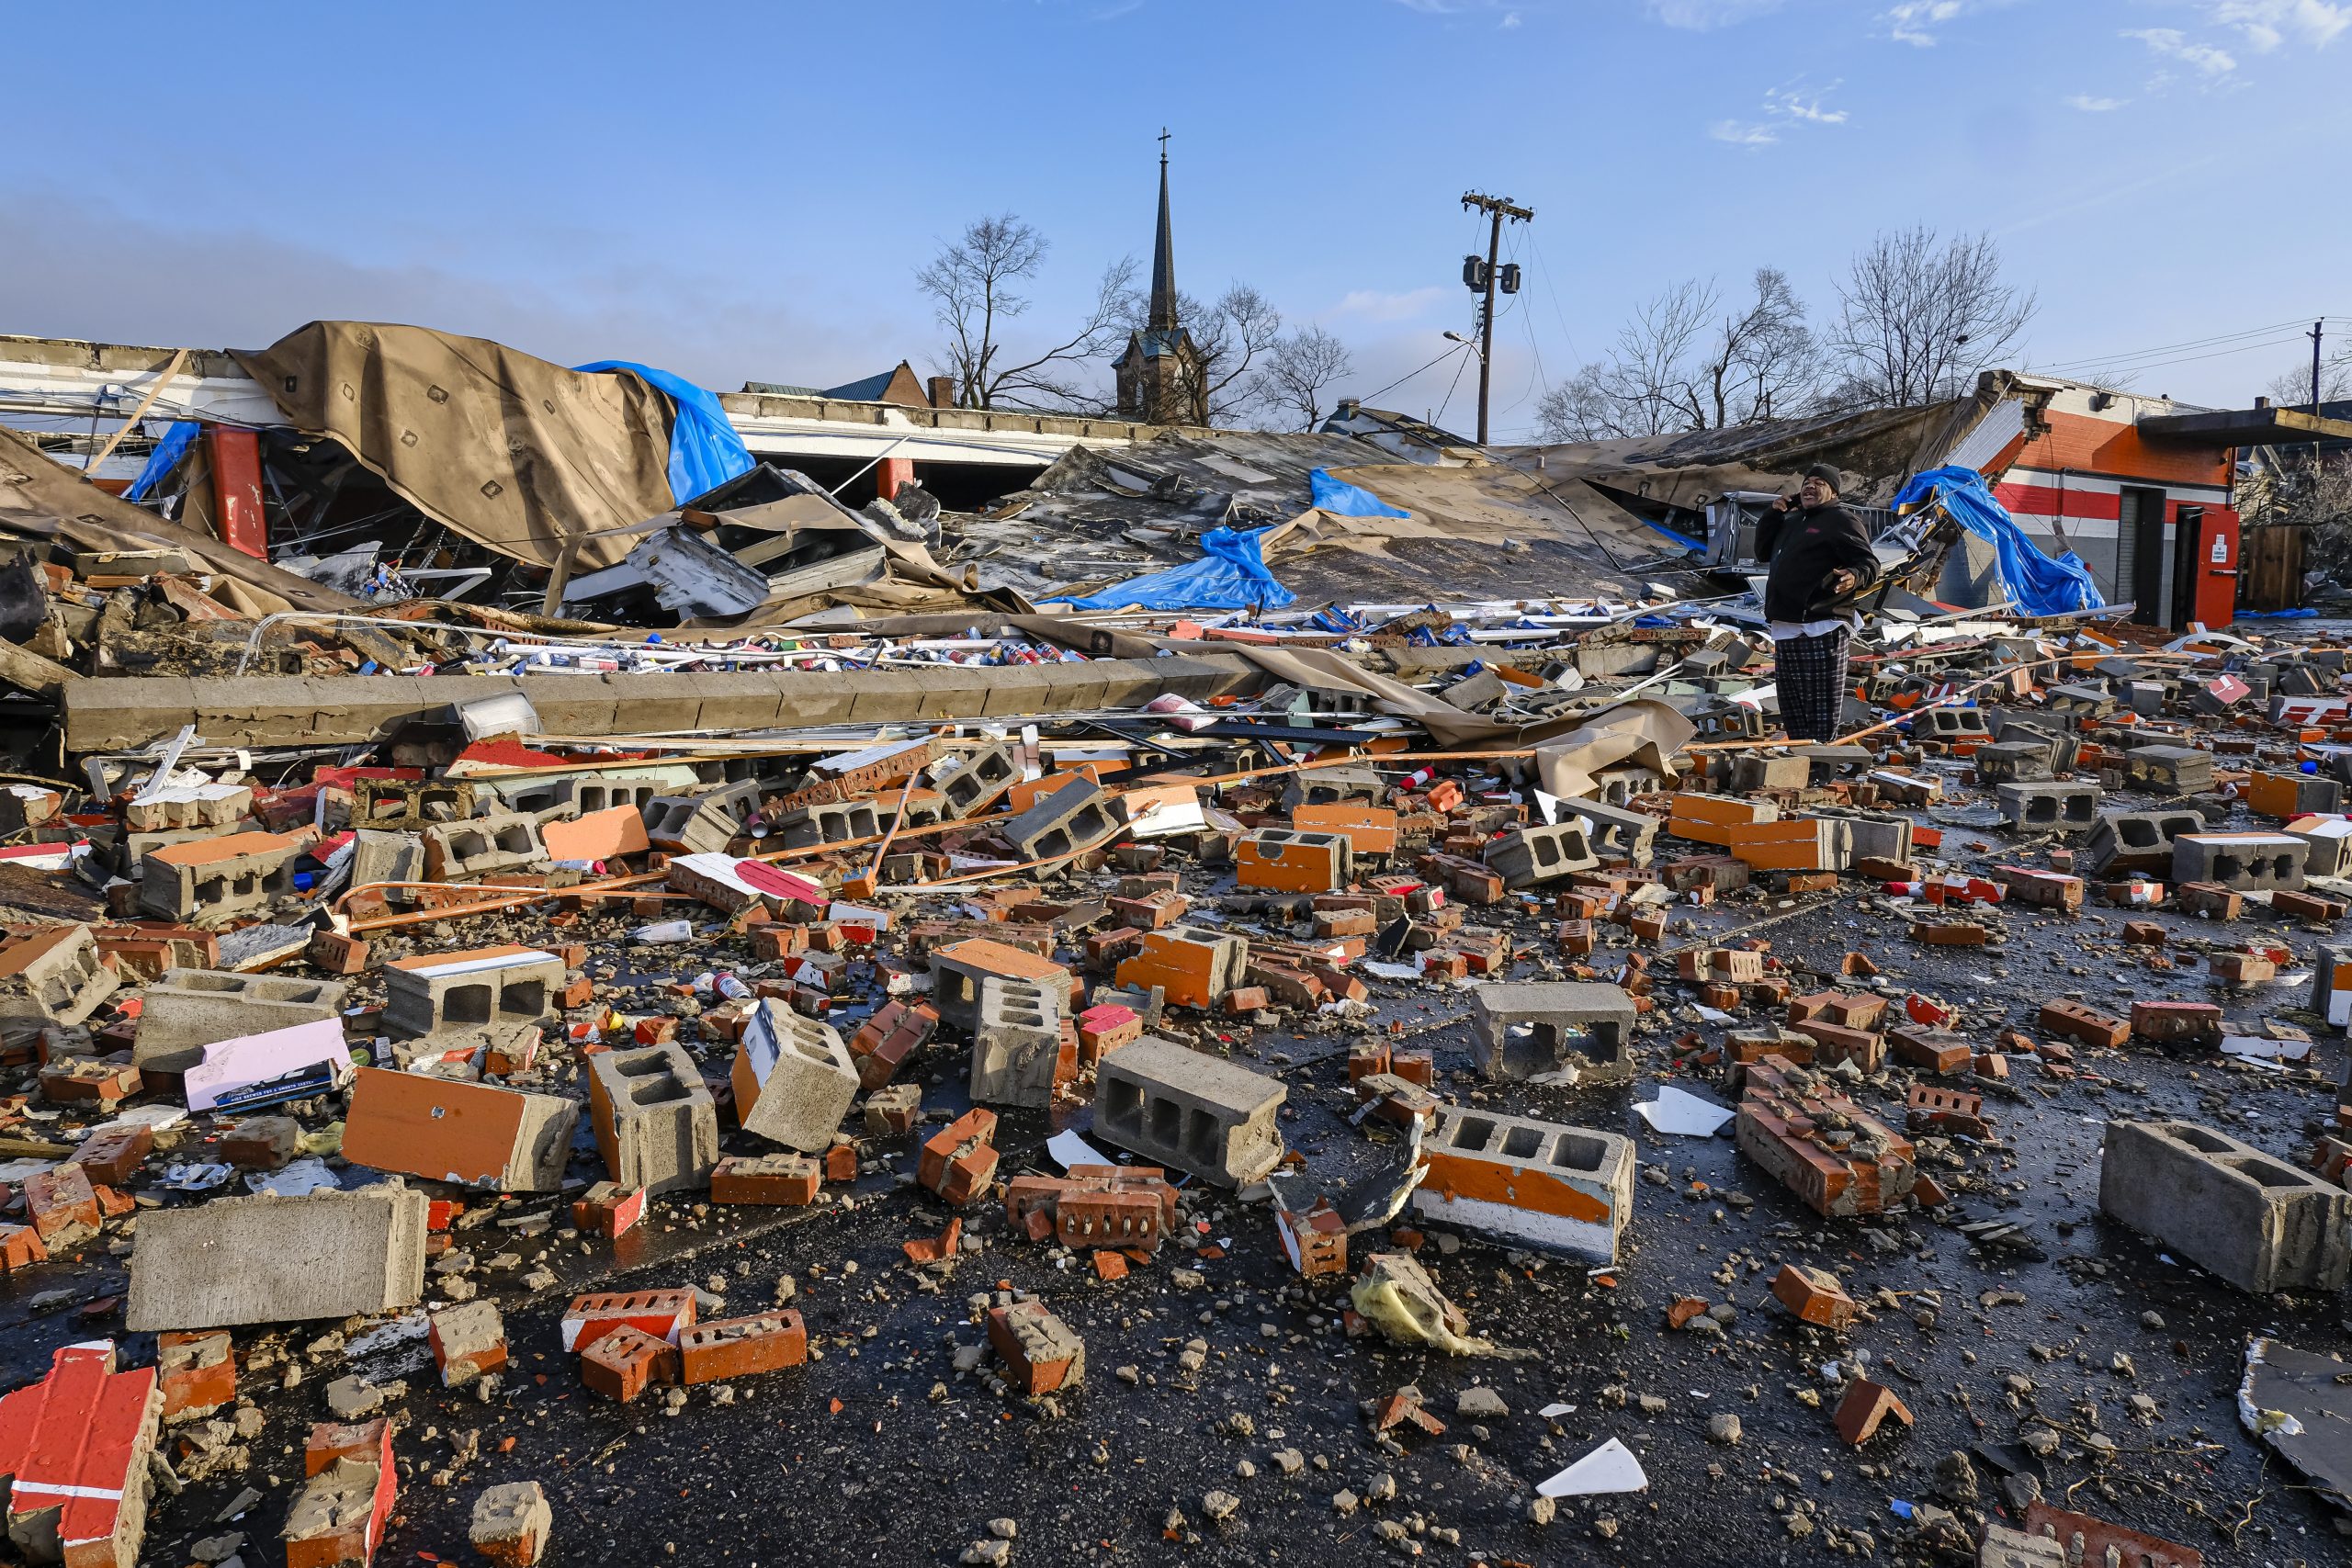 epa08267365 A destroyed auto parts store was among the damage by a tornado in Nashville, Tennessee, USA, 03 March 2020. The tornado that moved across Middle Tennessee has left at least 19 dead according to official reports.  EPA/RICK MUSACCHIO